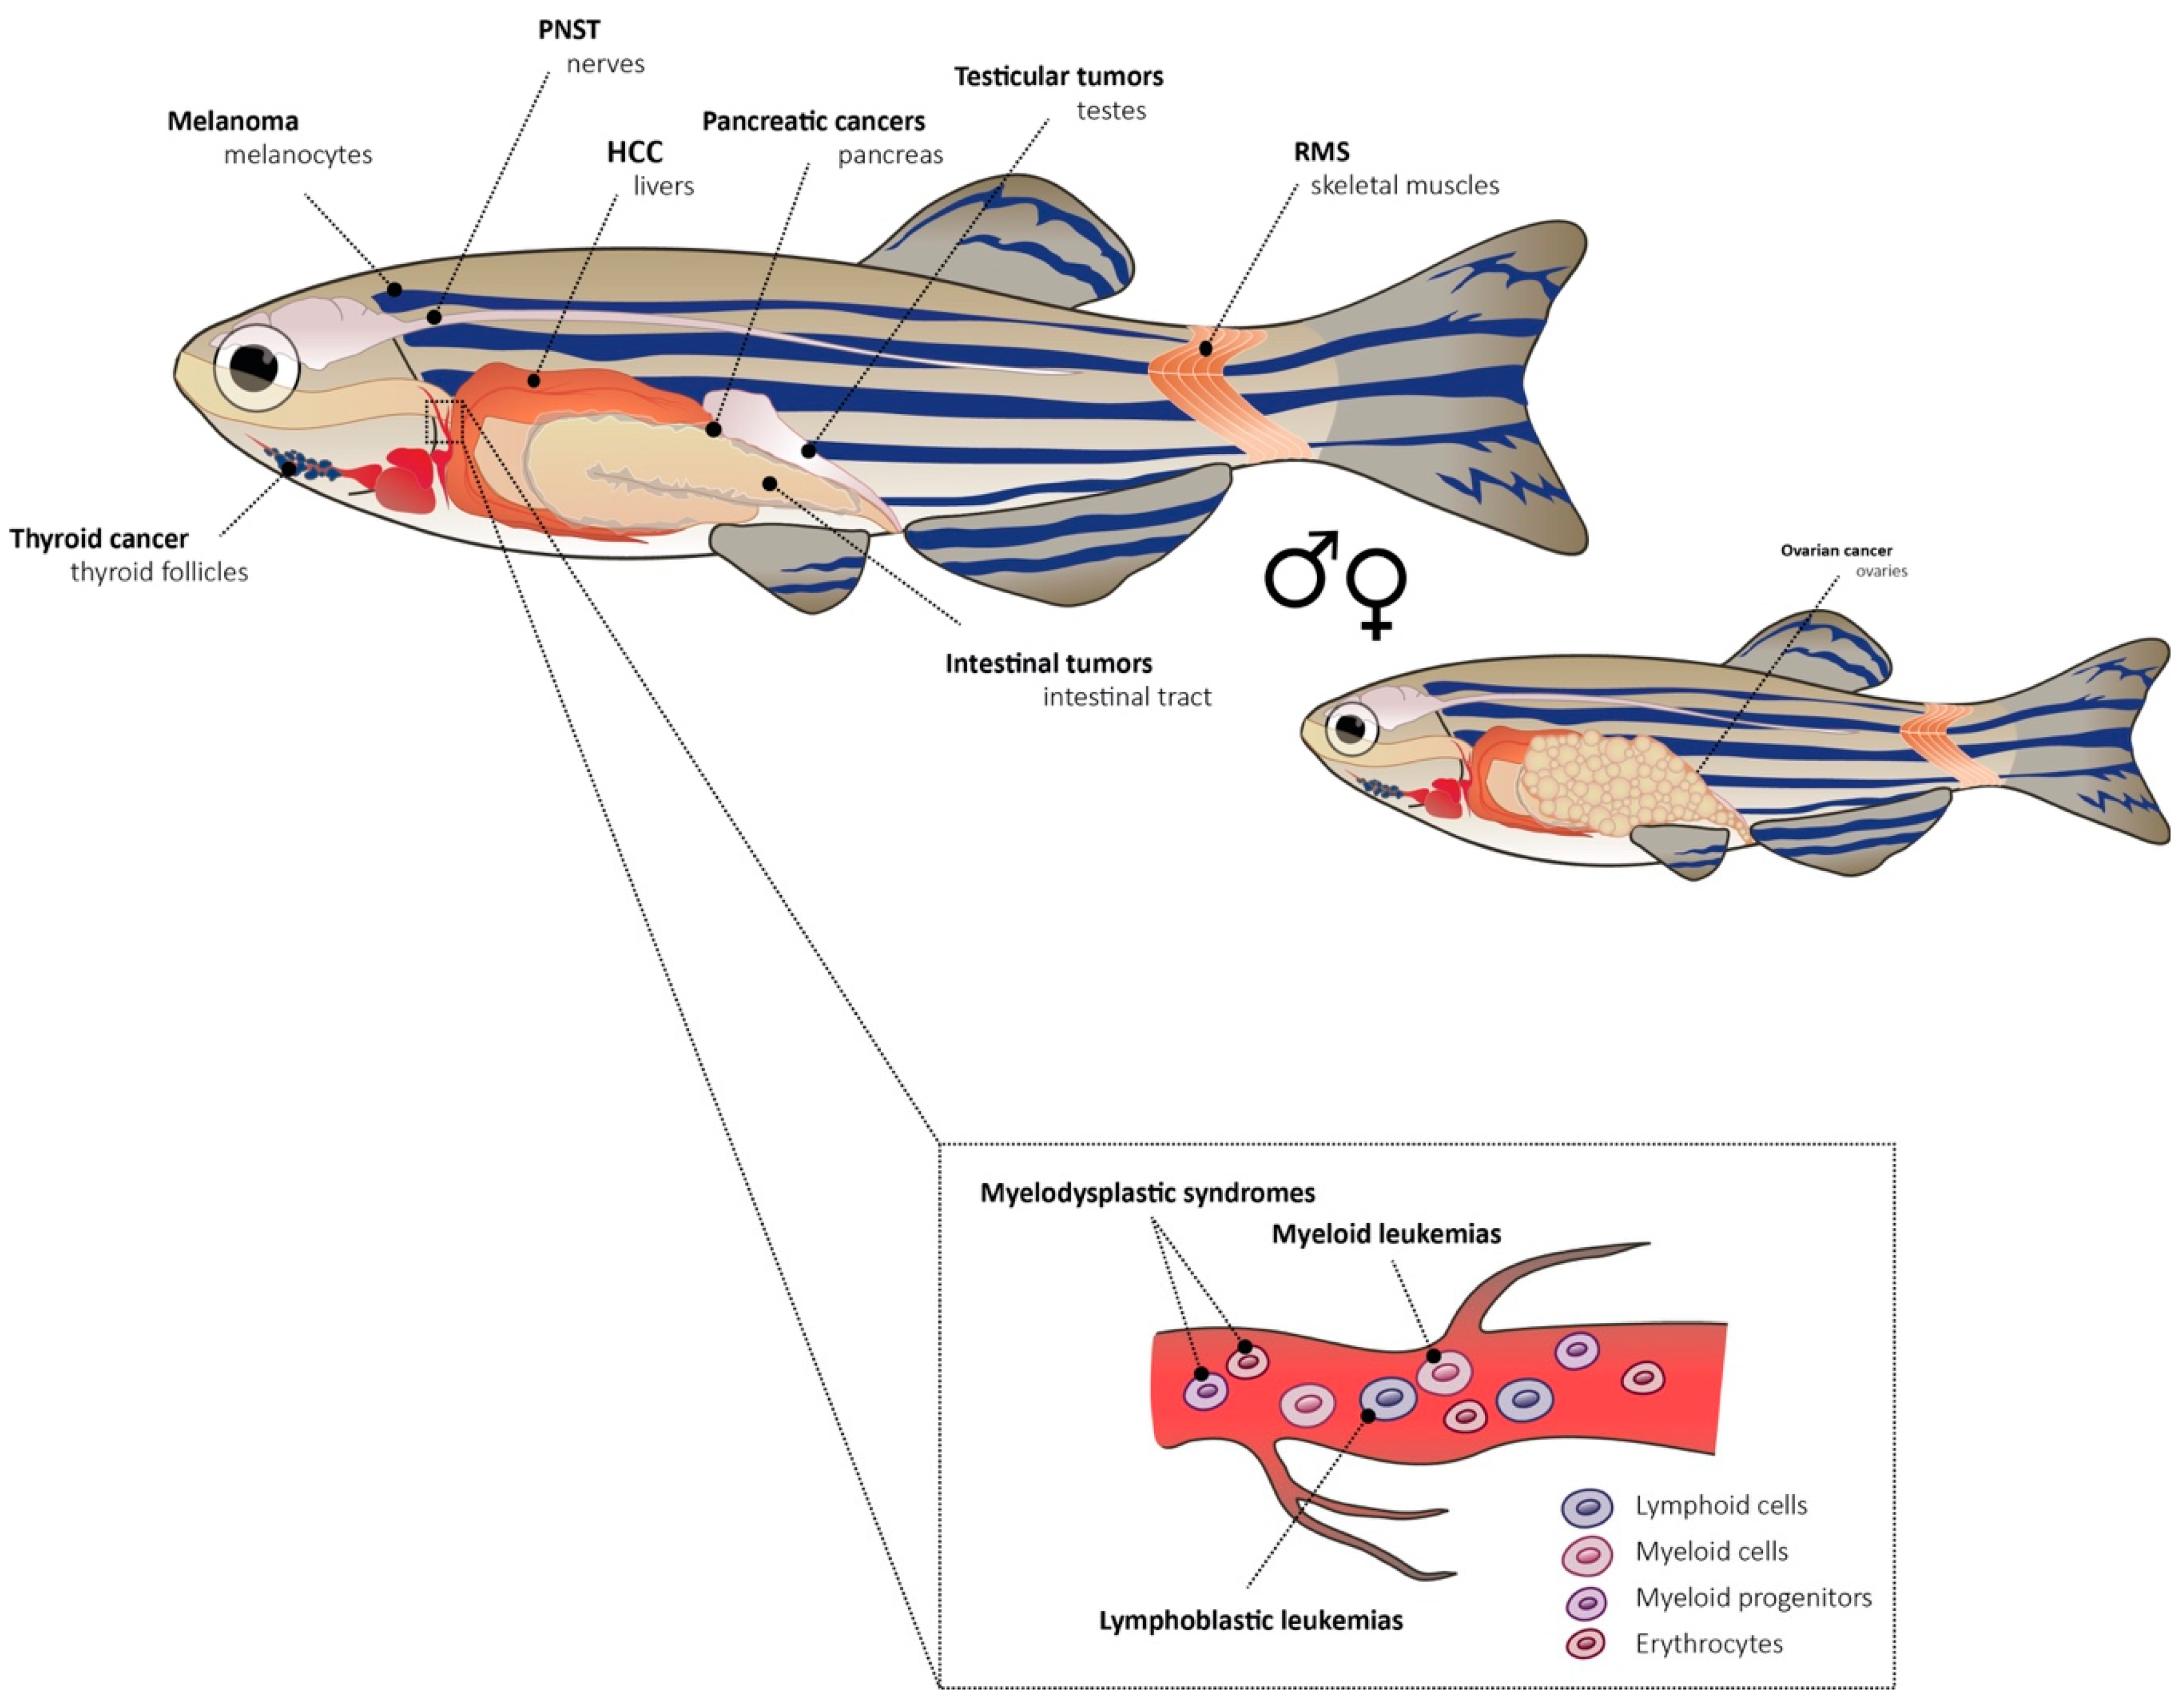 Genes | Free Full-Text | Zebrafish Models of Cancer—New Insights on  Modeling Human Cancer in a Non-Mammalian Vertebrate